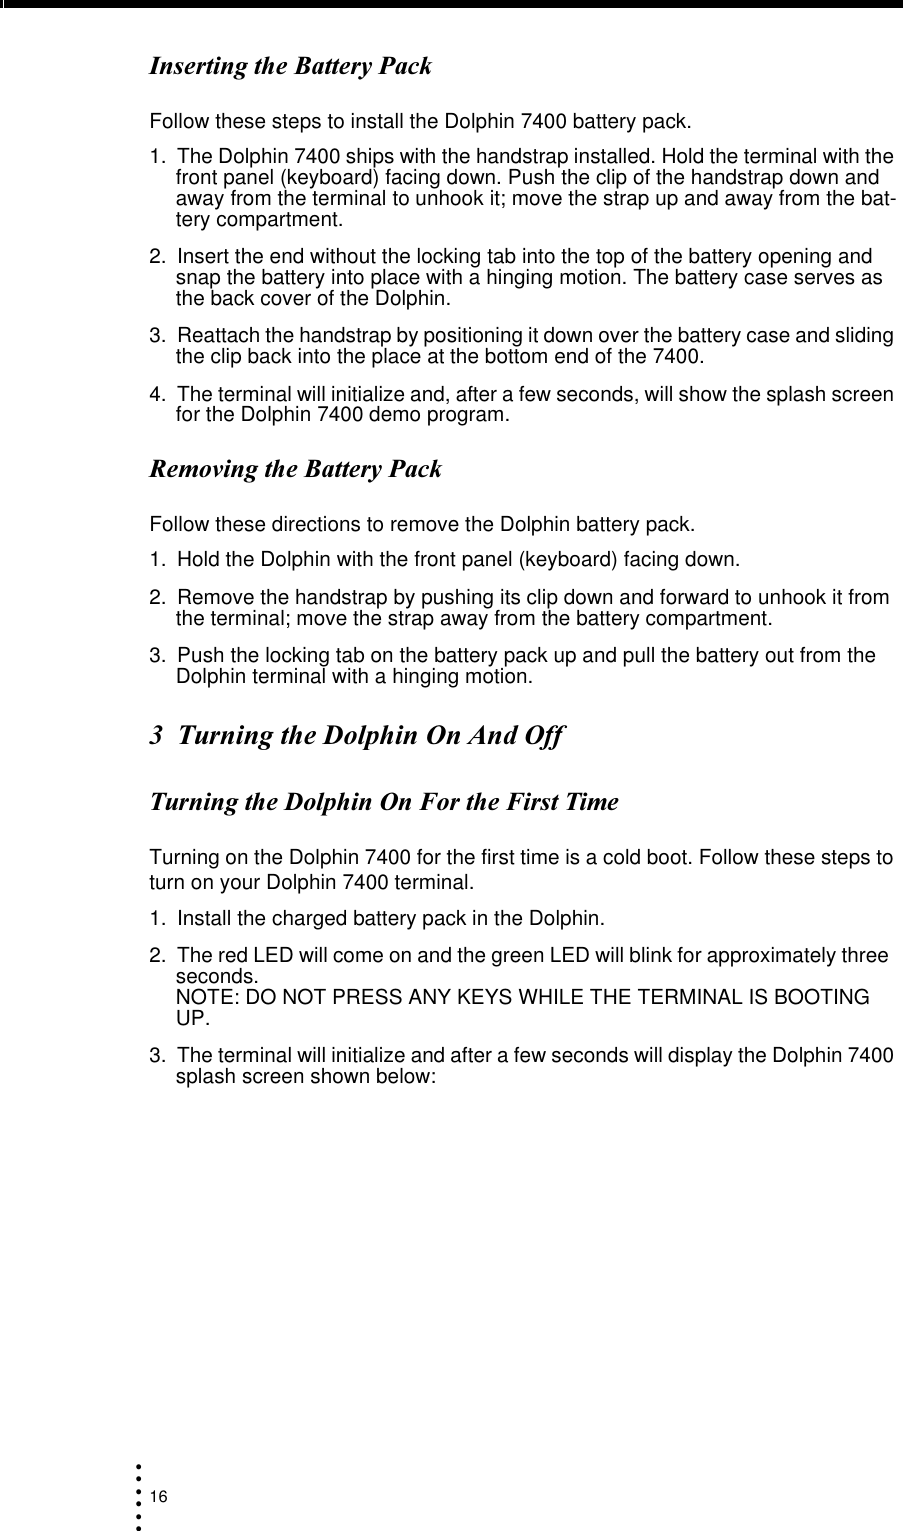 16• • • •••),-Follow these steps to install the Dolphin 7400 battery pack.1. The Dolphin 7400 ships with the handstrap installed. Hold the terminal with the front panel (keyboard) facing down. Push the clip of the handstrap down and away from the terminal to unhook it; move the strap up and away from the bat-tery compartment.2. Insert the end without the locking tab into the top of the battery opening and snap the battery into place with a hinging motion. The battery case serves as the back cover of the Dolphin.3. Reattach the handstrap by positioning it down over the battery case and sliding the clip back into the place at the bottom end of the 7400.4. The terminal will initialize and, after a few seconds, will show the splash screen for the Dolphin 7400 demo program.+),-Follow these directions to remove the Dolphin battery pack.1. Hold the Dolphin with the front panel (keyboard) facing down.2. Remove the handstrap by pushing its clip down and forward to unhook it from the terminal; move the strap away from the battery compartment.3. Push the locking tab on the battery pack up and pull the battery out from the Dolphin terminal with a hinging motion.&amp;)0*0)0##Turning on the Dolphin 7400 for the first time is a cold boot. Follow these steps to turn on your Dolphin 7400 terminal.1. Install the charged battery pack in the Dolphin.2. The red LED will come on and the green LED will blink for approximately three  seconds.                                                                                                                        NOTE: DO NOT PRESS ANY KEYS WHILE THE TERMINAL IS BOOTING UP. 3. The terminal will initialize and after a few seconds will display the Dolphin 7400 splash screen shown below: